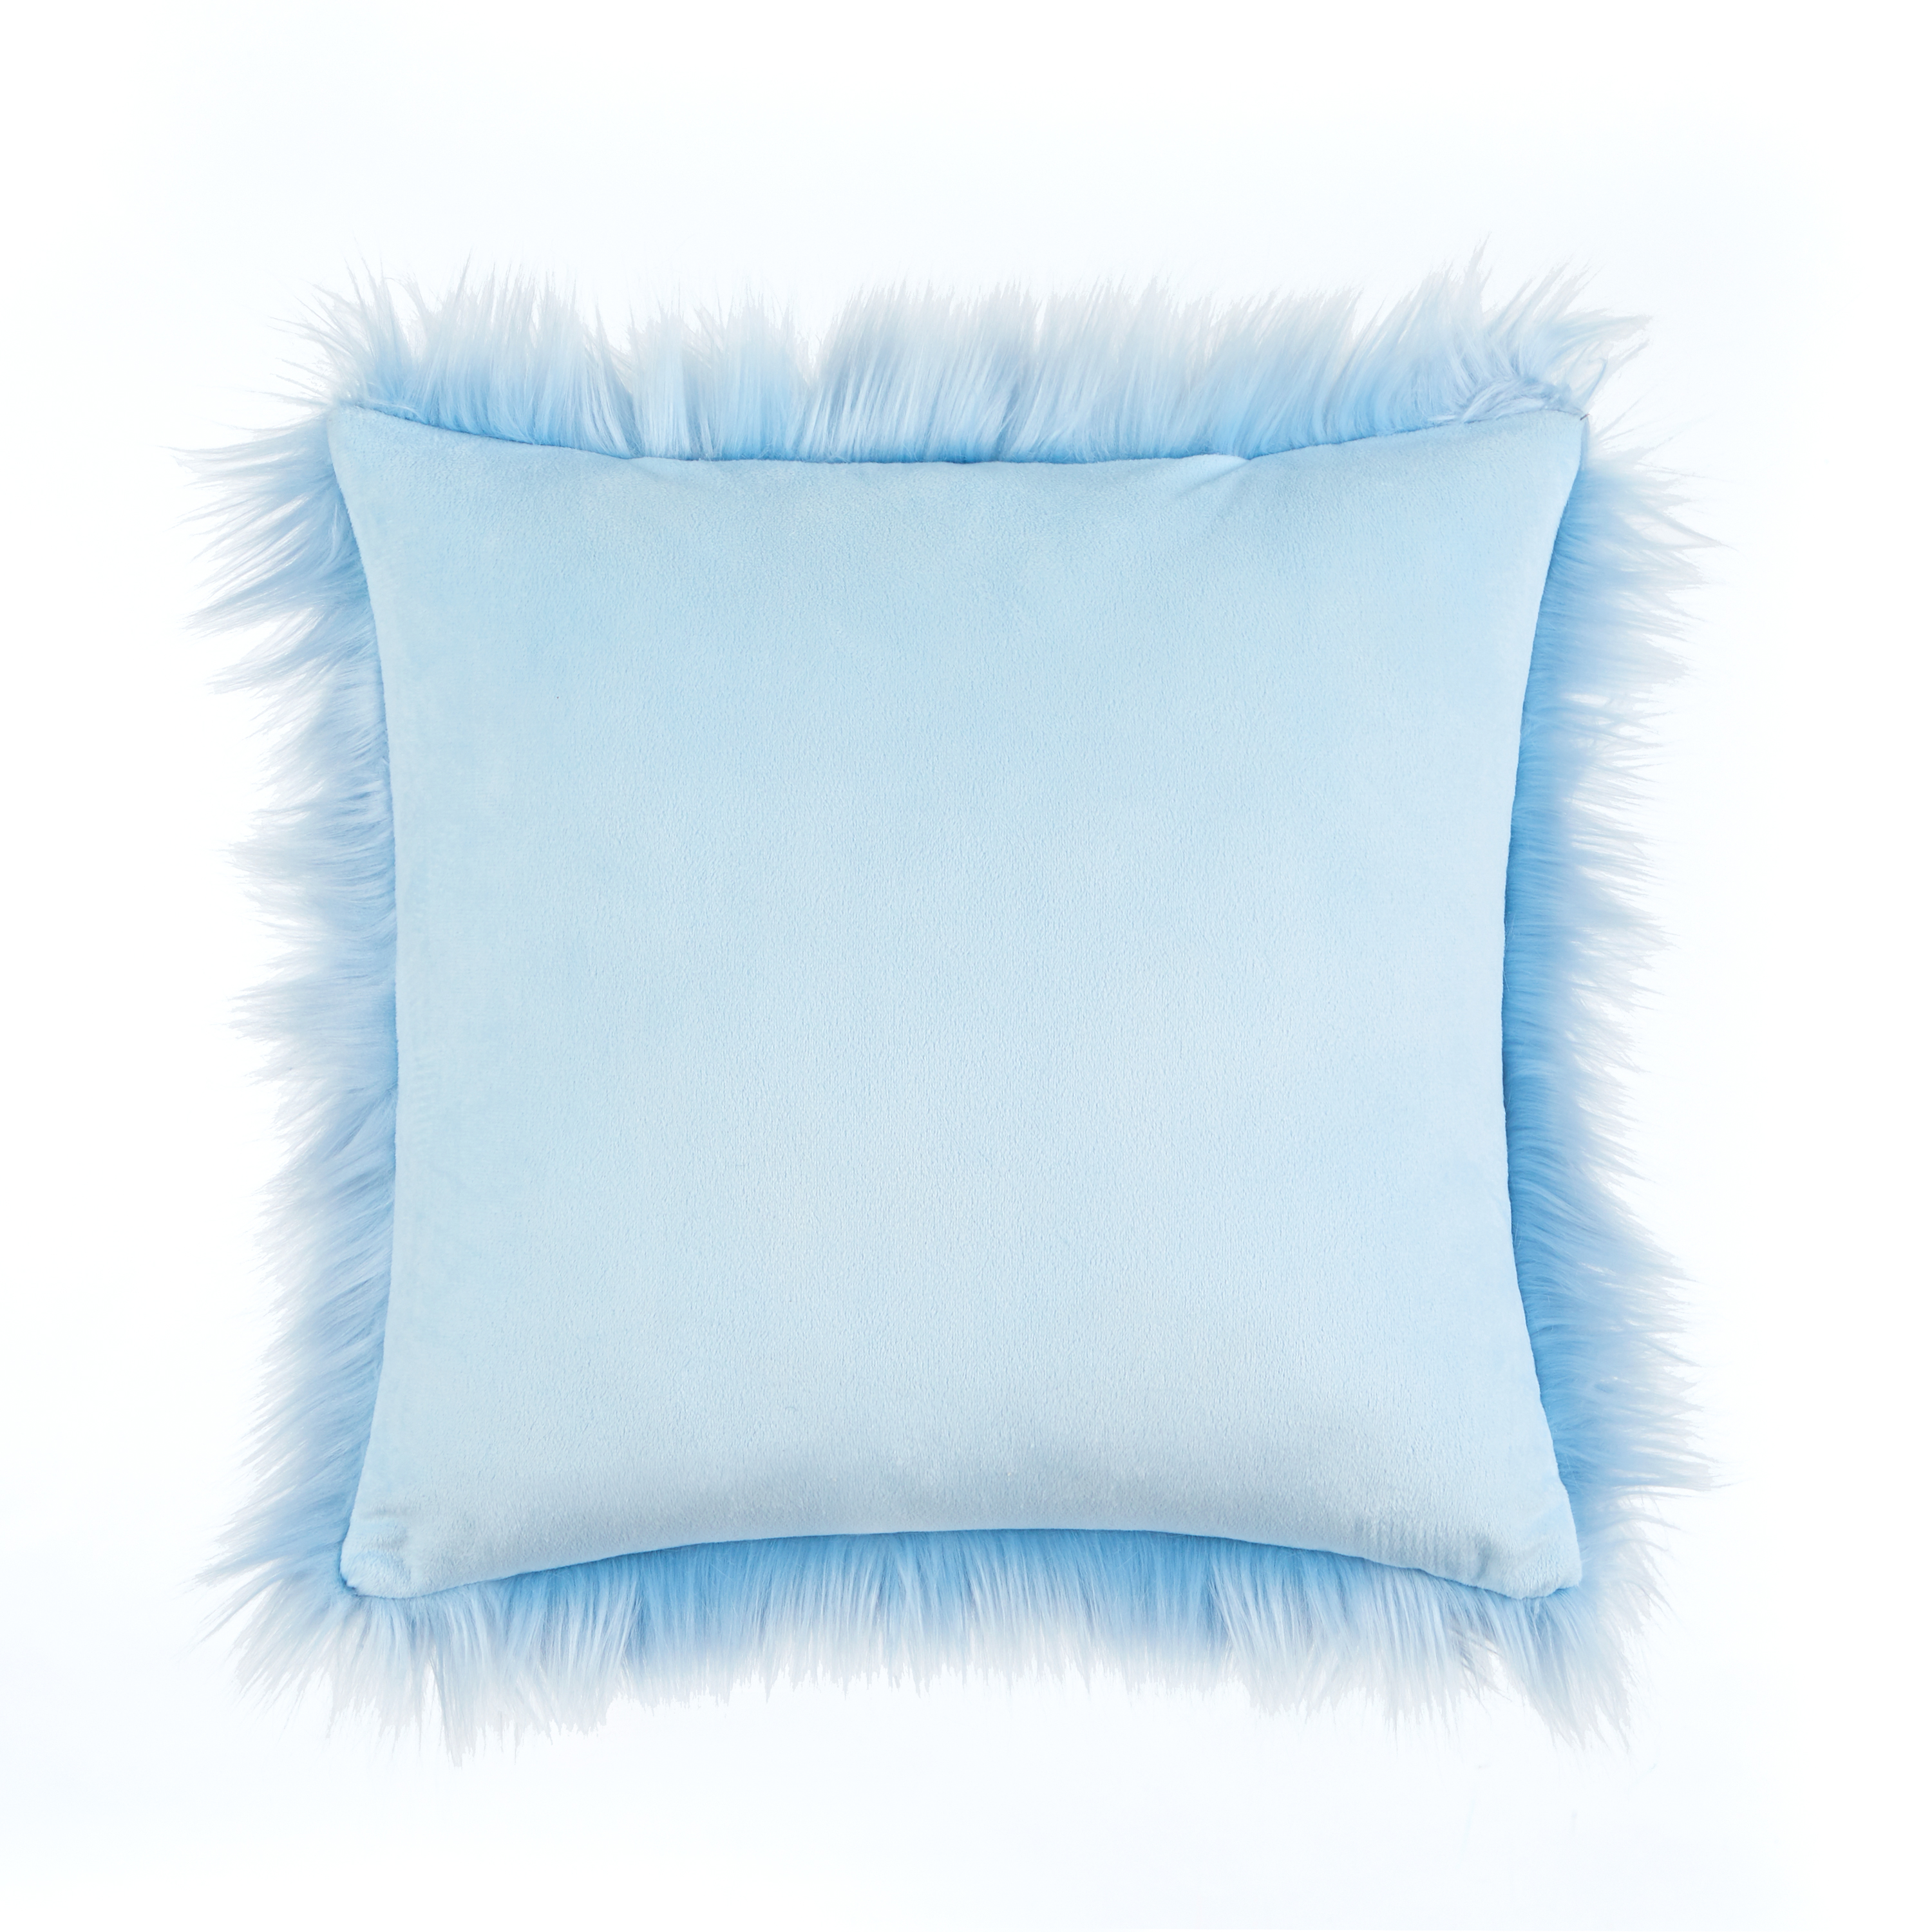 Your Zone Mainstays Flokati Decorative Throw Pillow 16" x 16", Blue - image 5 of 5